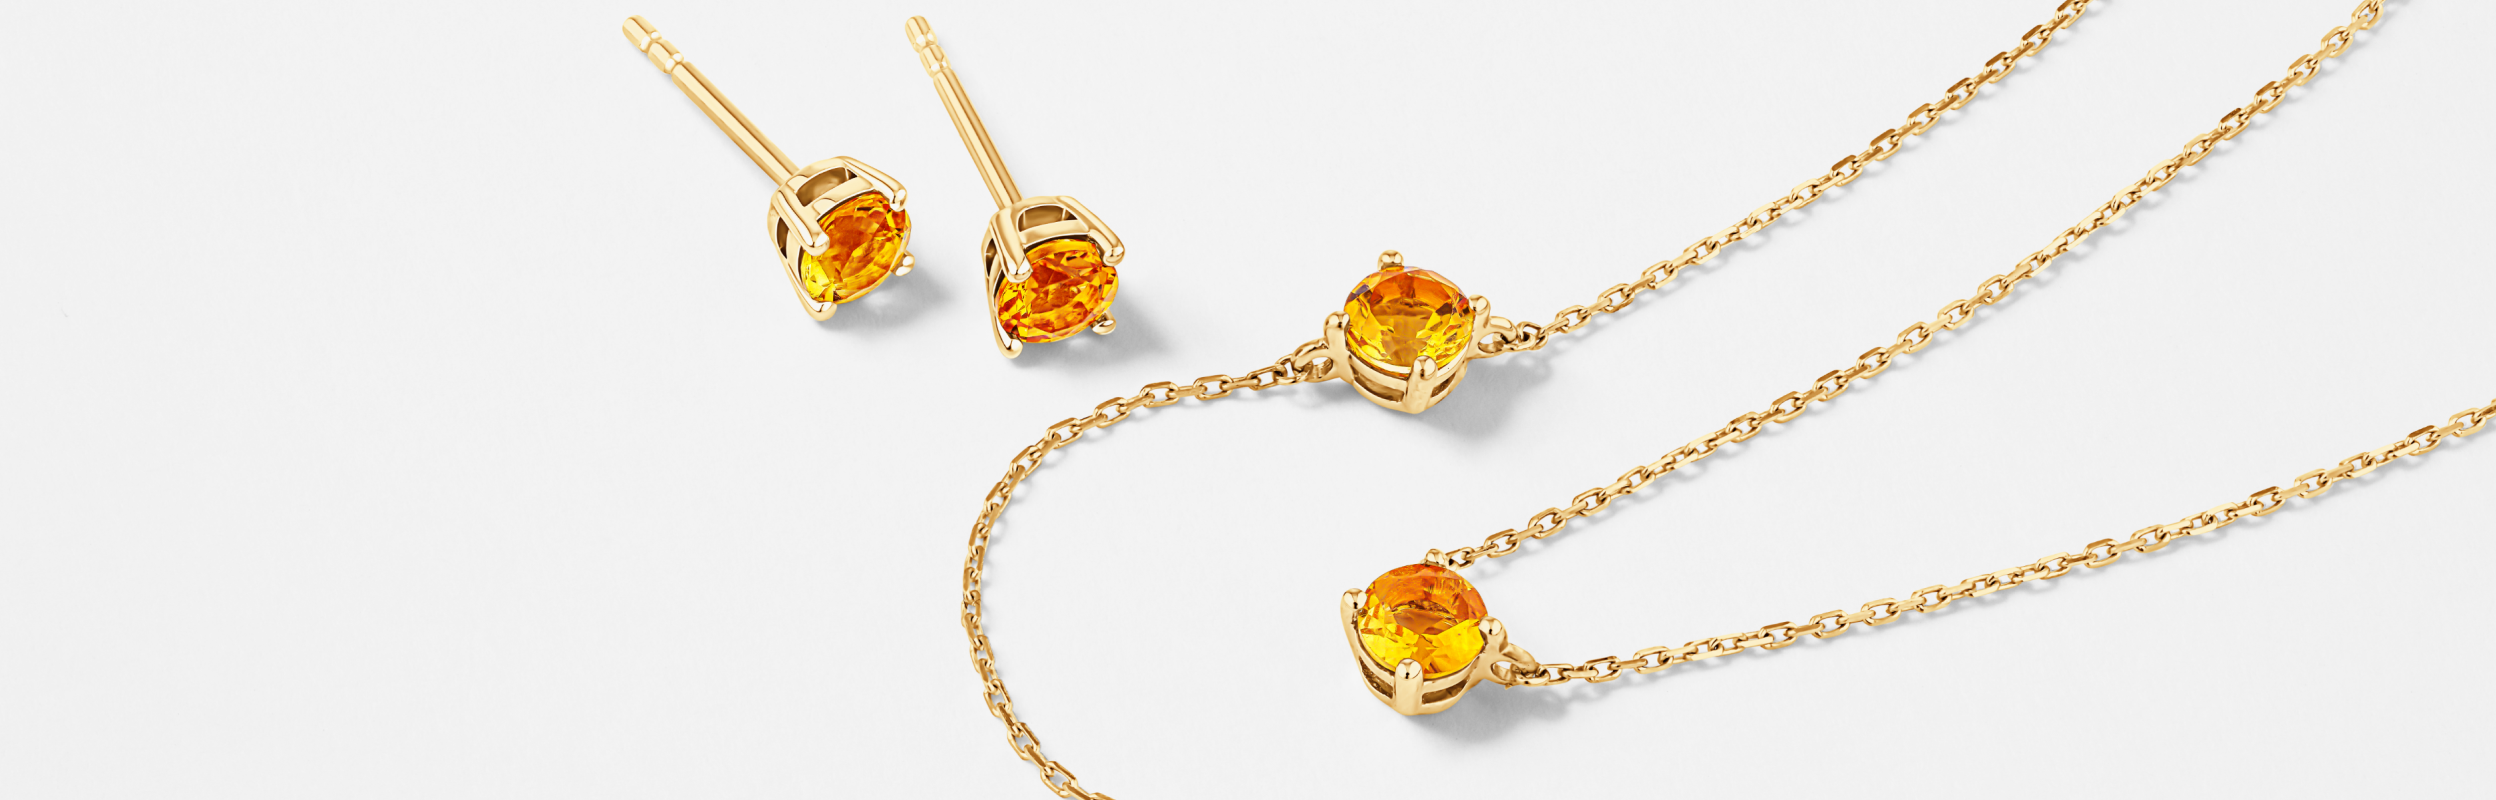 Citrine earrings, necklace and bracelet in yellow gold